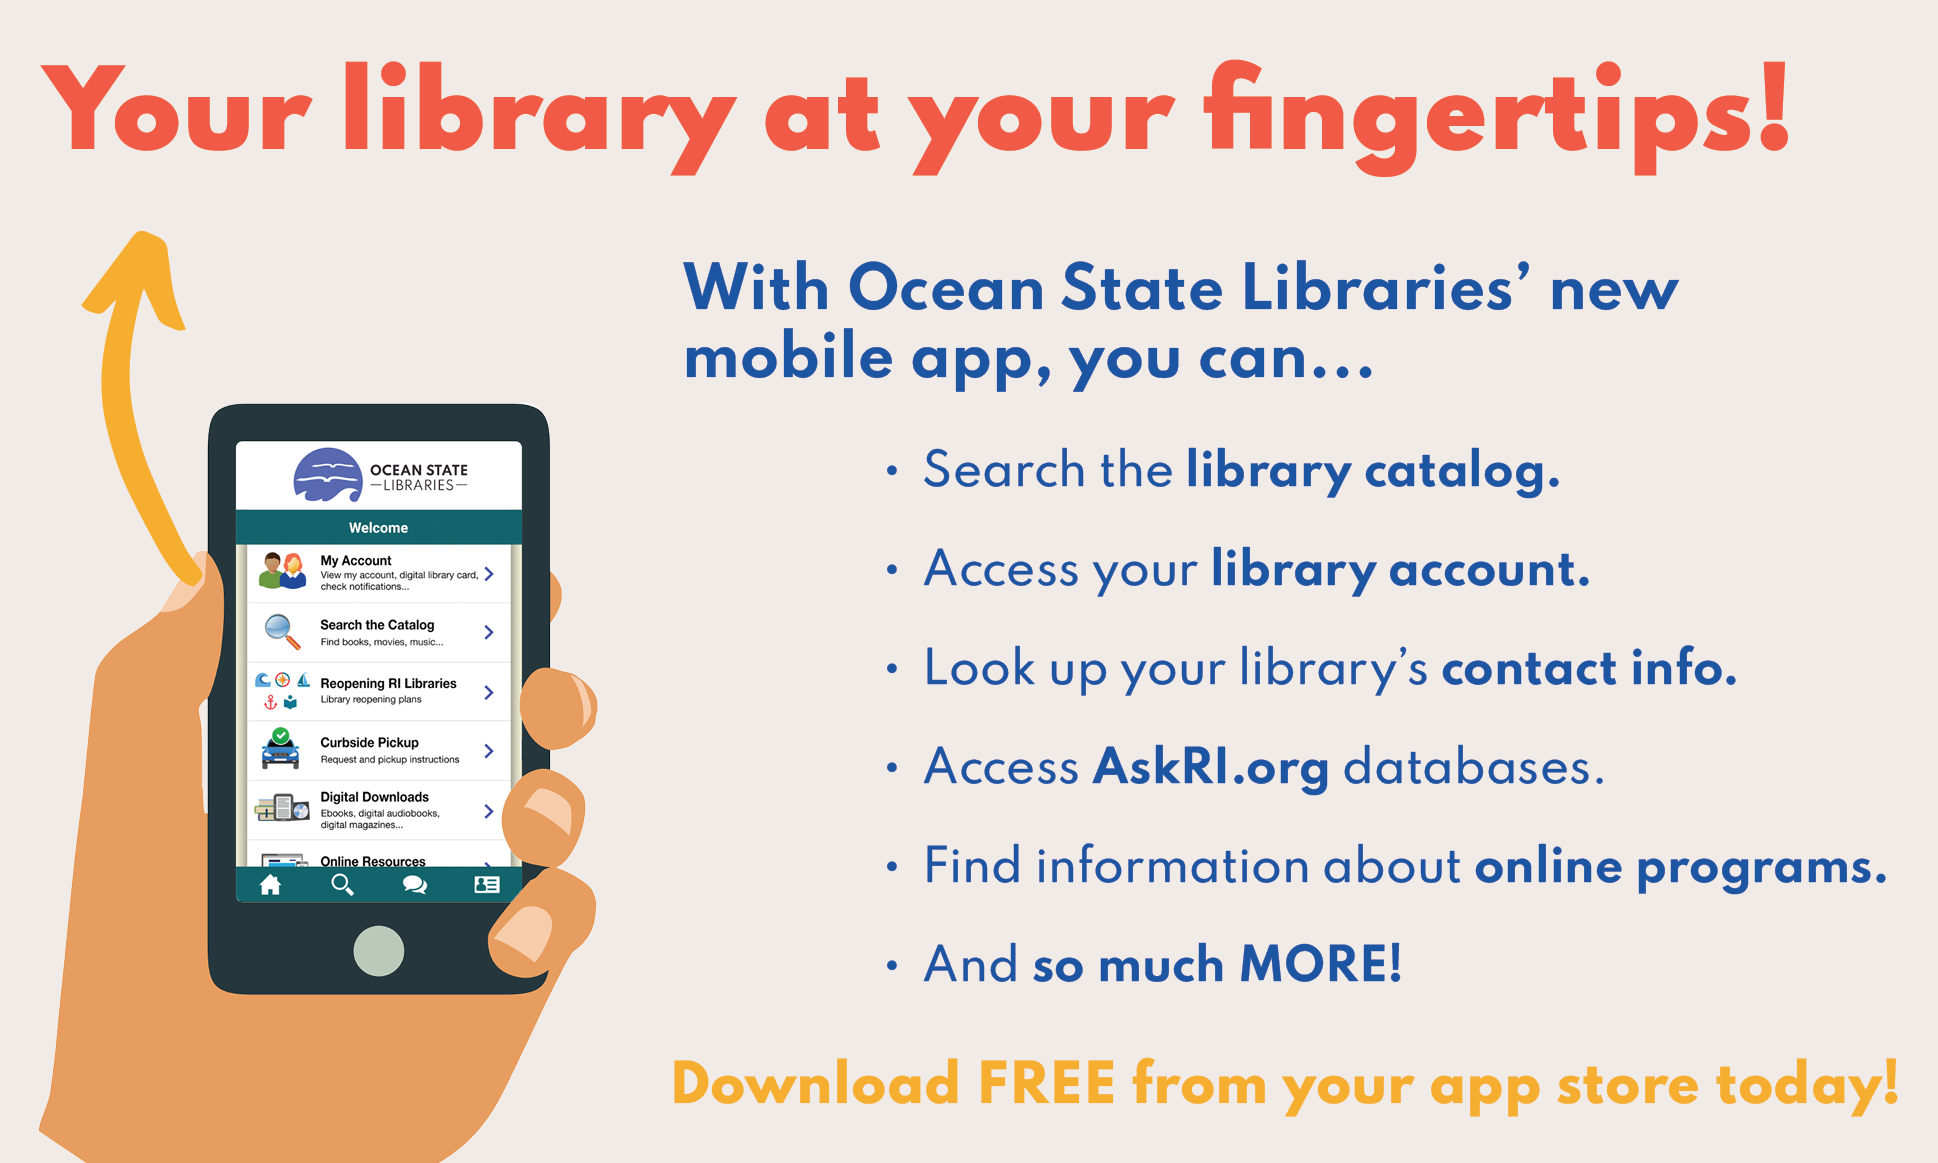 The library at your fingertips!